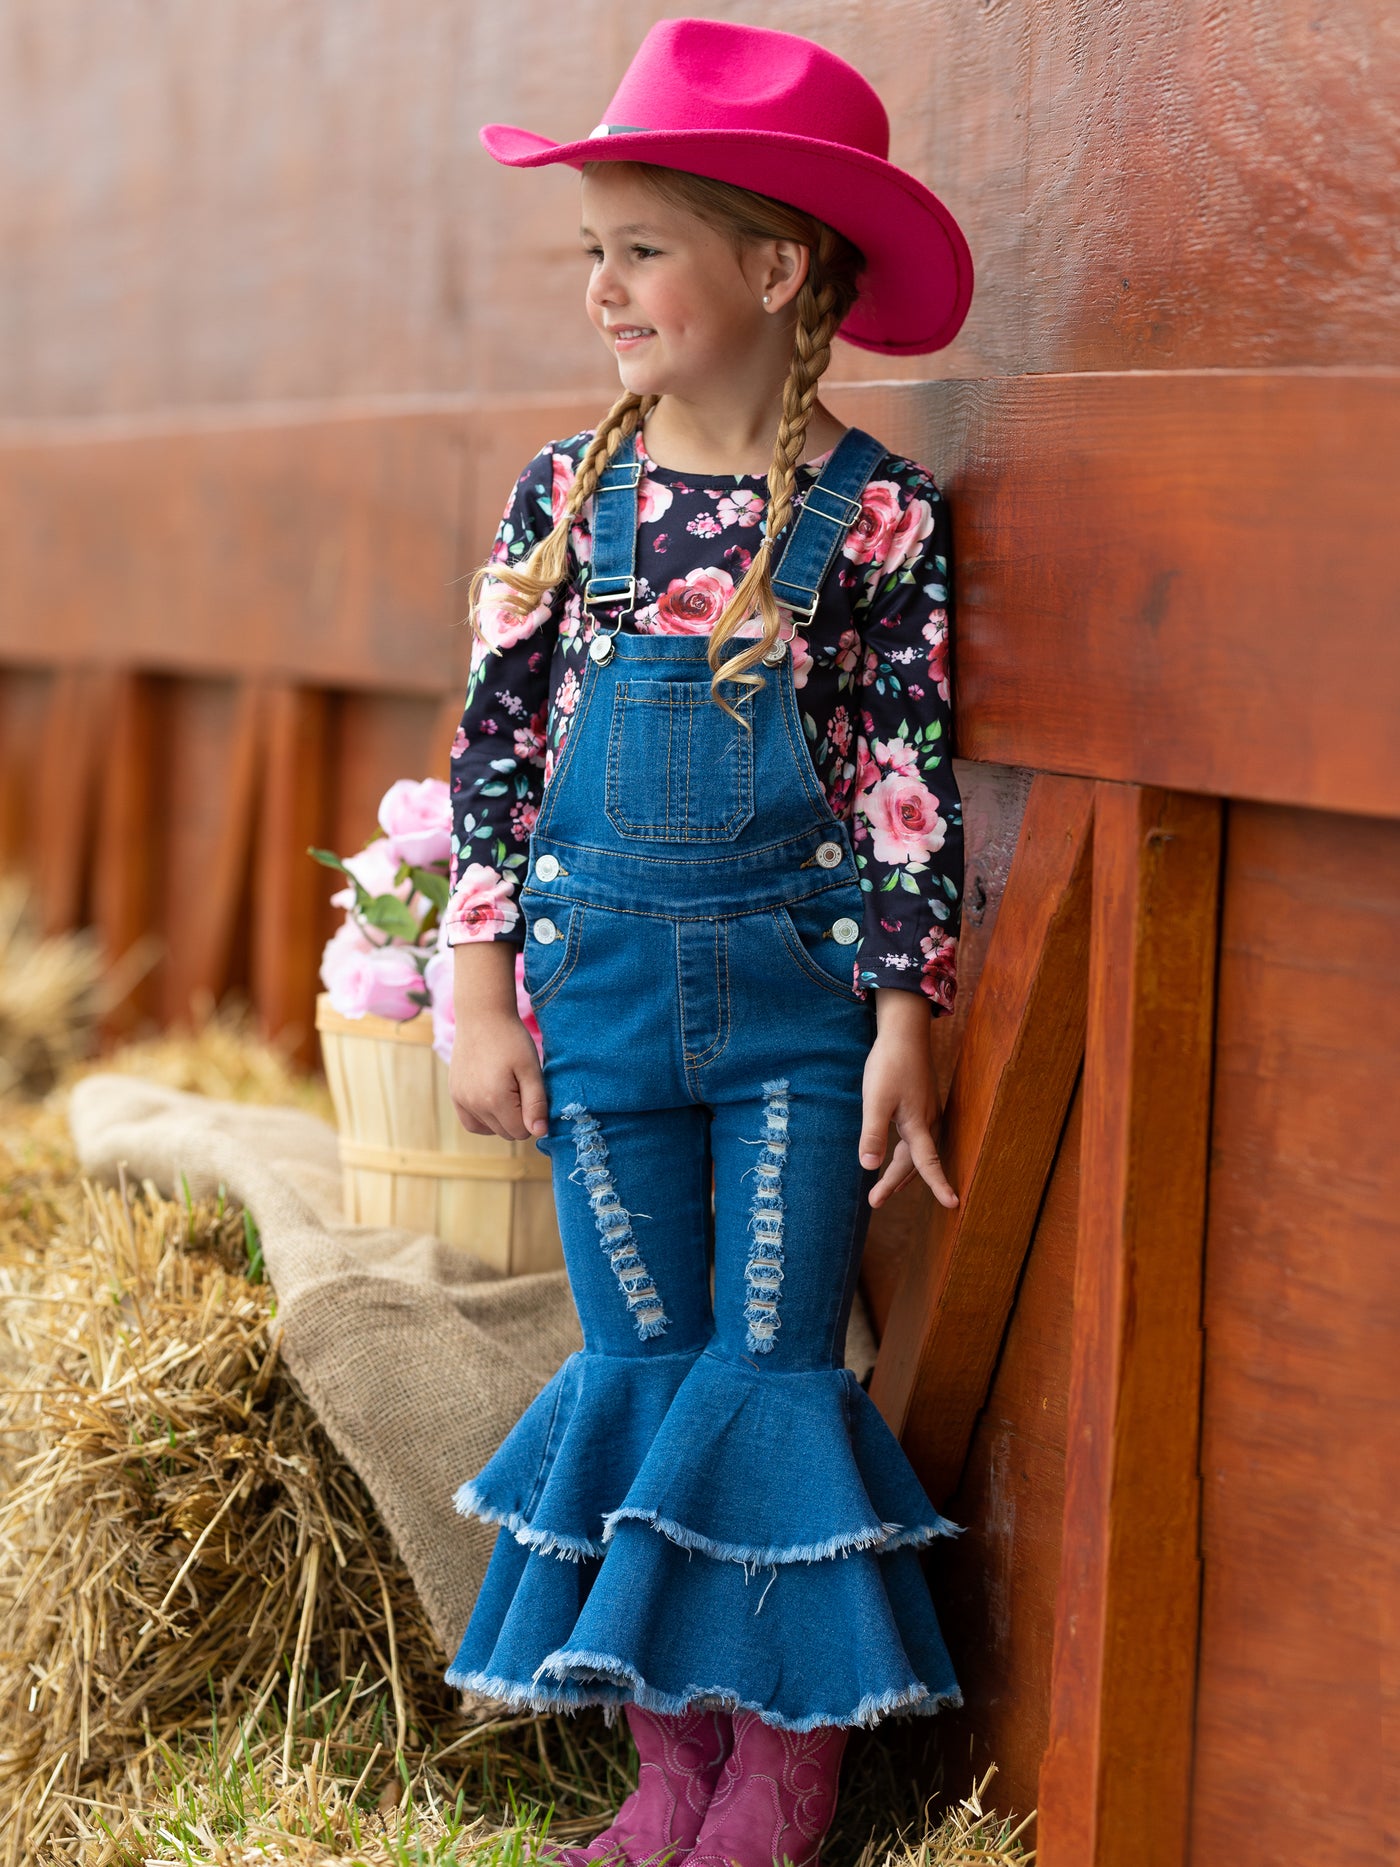 Little Girls Fall Outfits | Flared Denim Overall Set | Girls Boutique